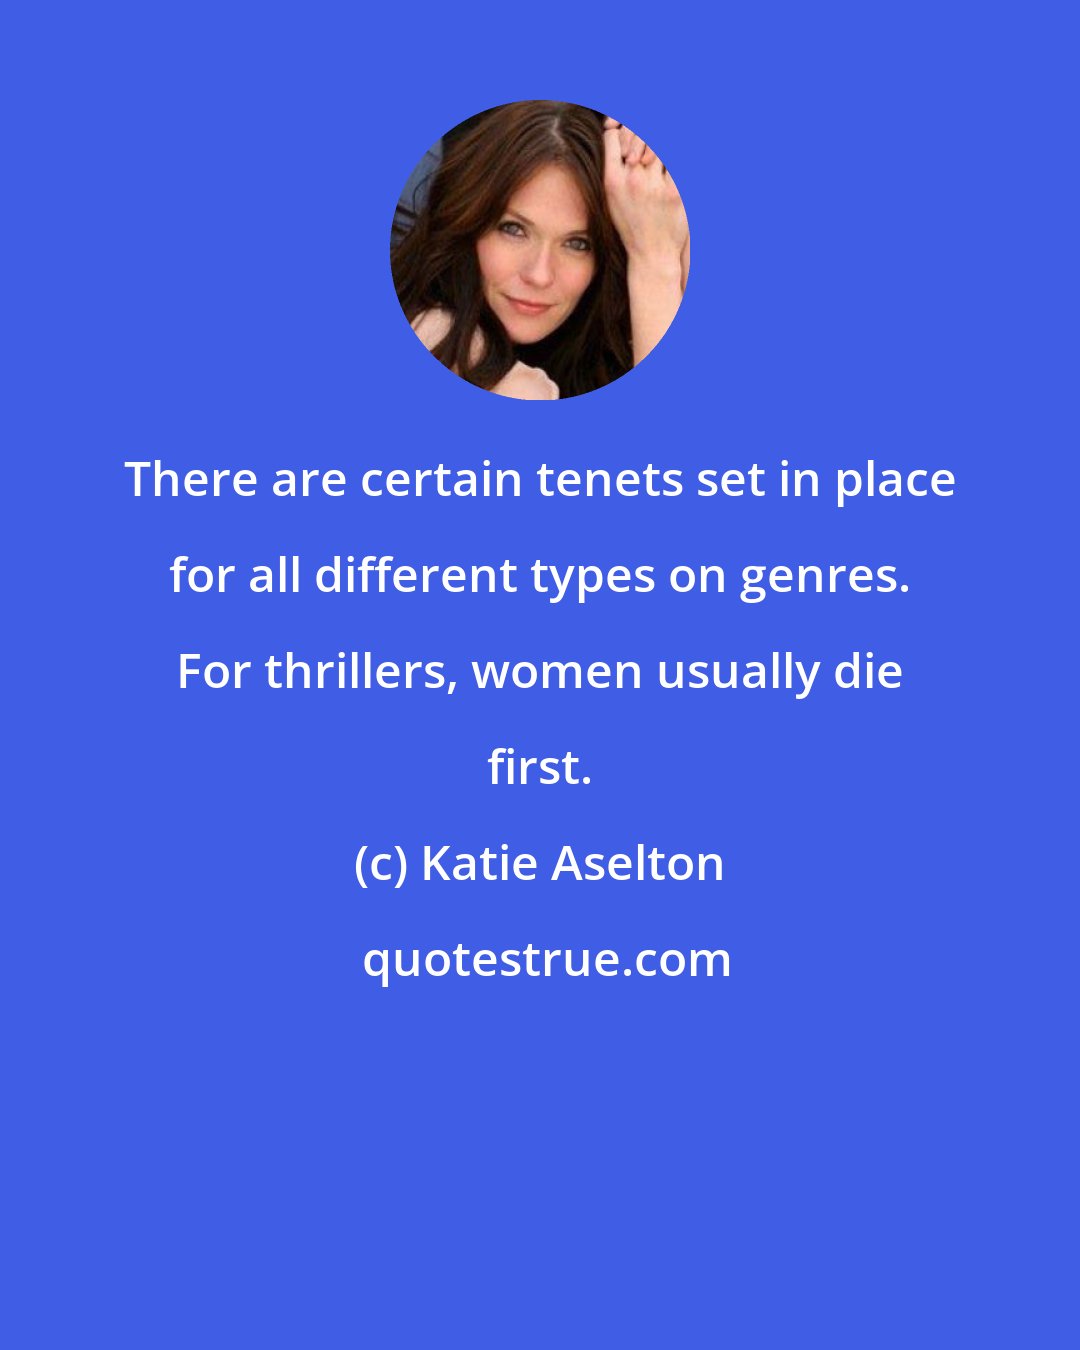 Katie Aselton: There are certain tenets set in place for all different types on genres. For thrillers, women usually die first.